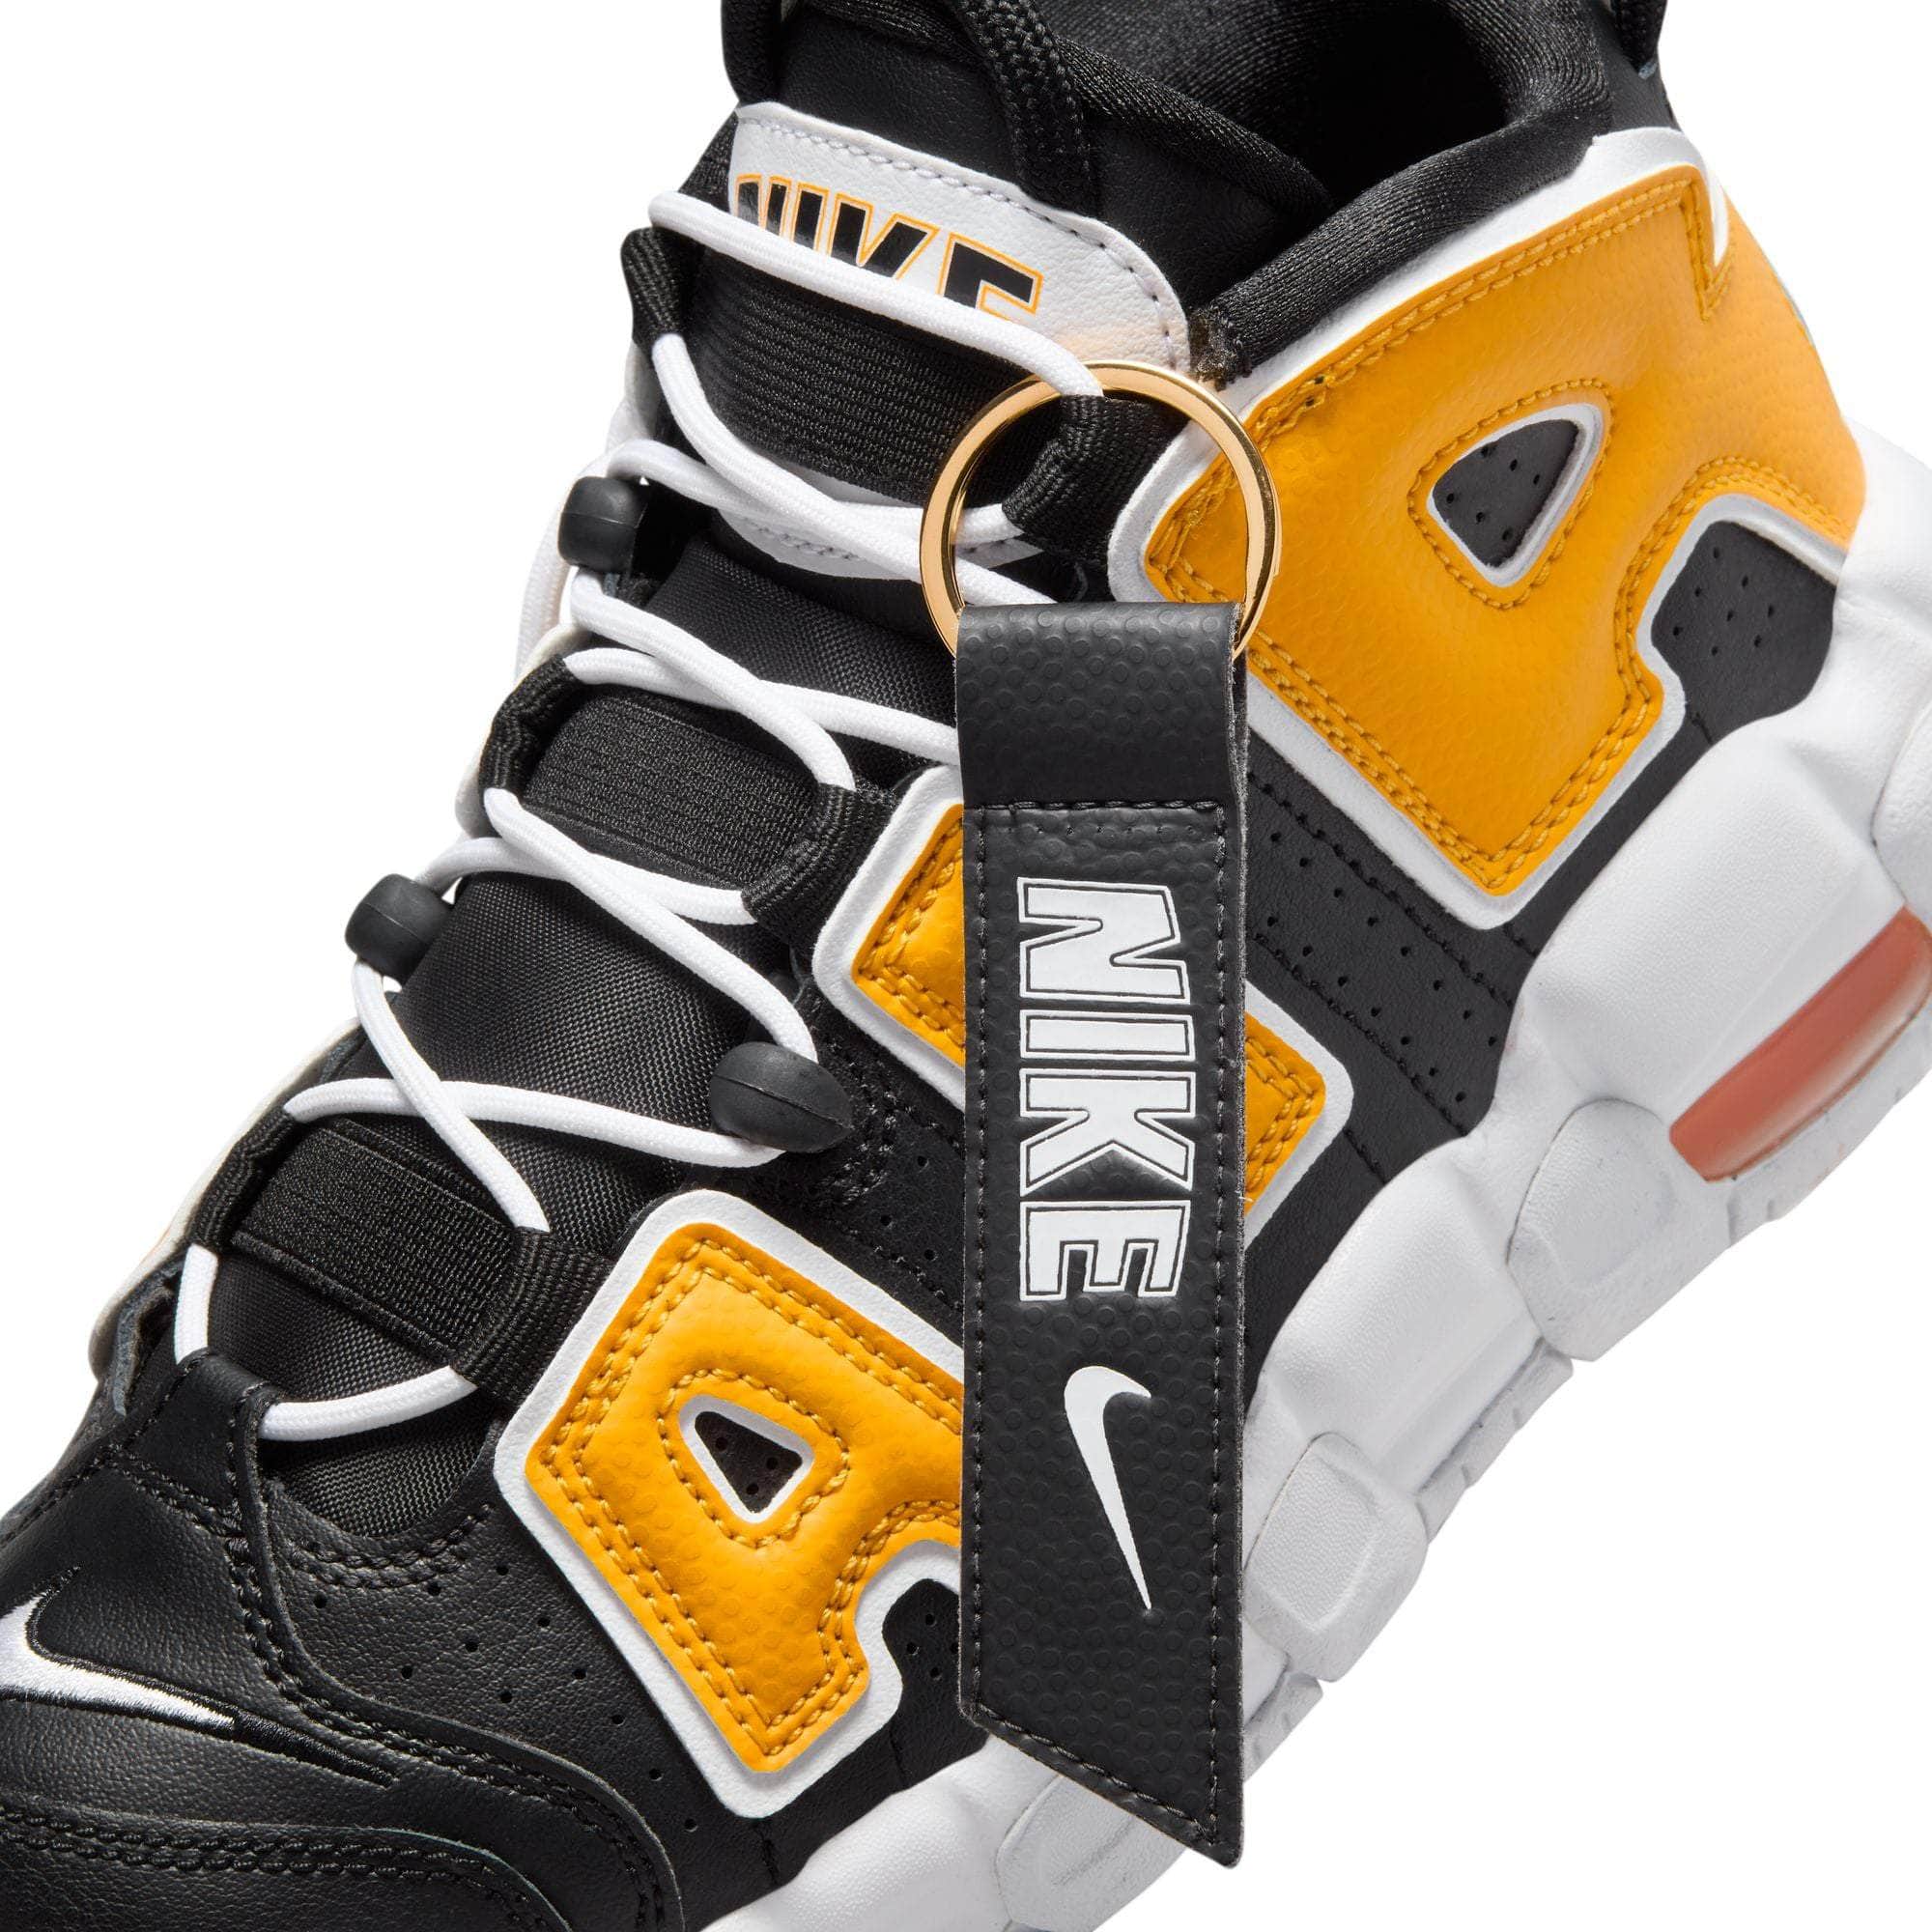 Nike Footwear Nike Air More Uptempo “Be True To Her School” - Boy's GS